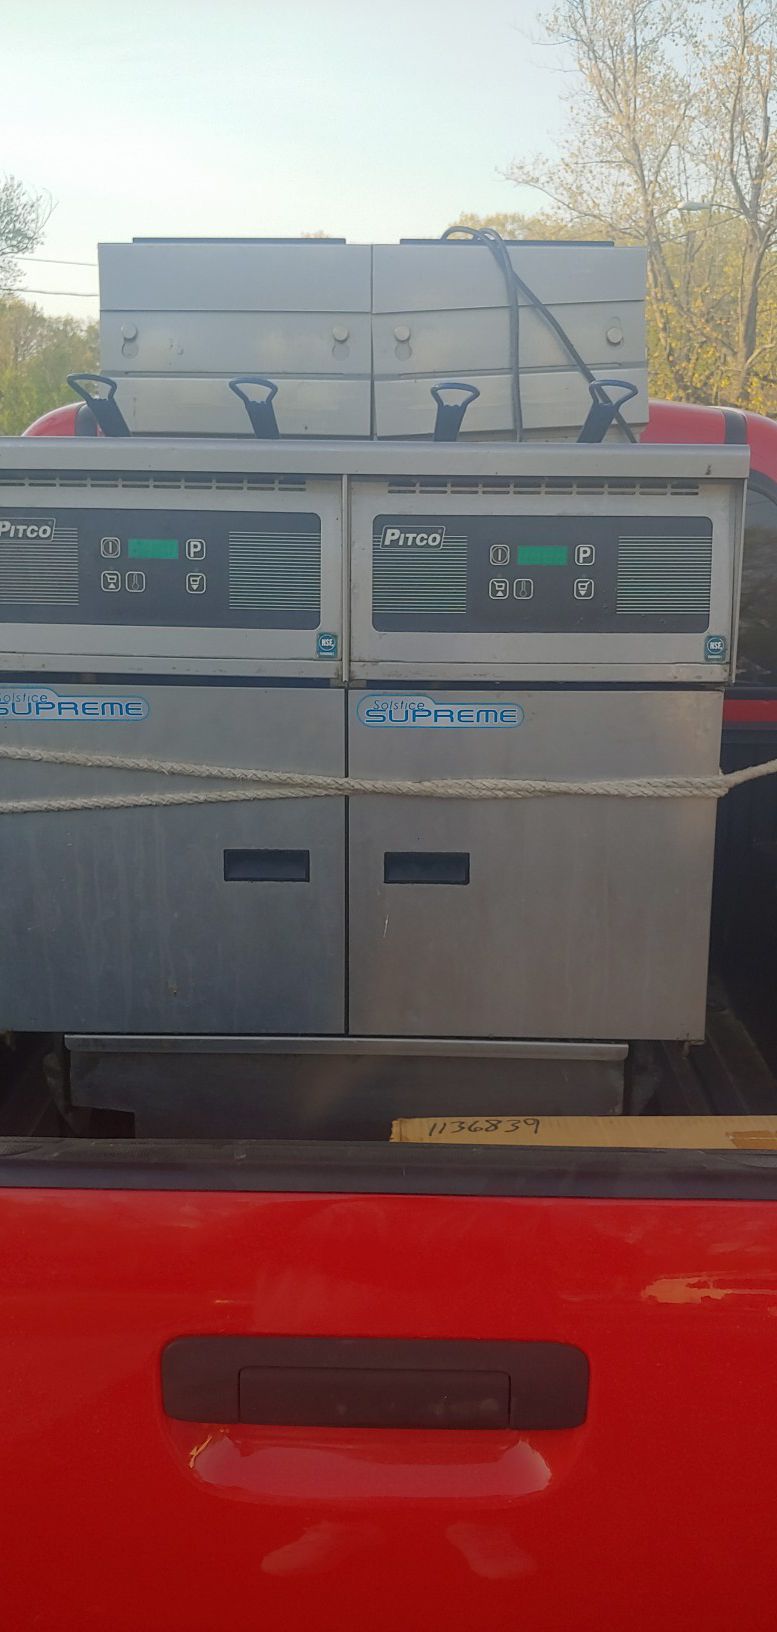 commercial fryer in very good condition/ asking price 4000negotiable